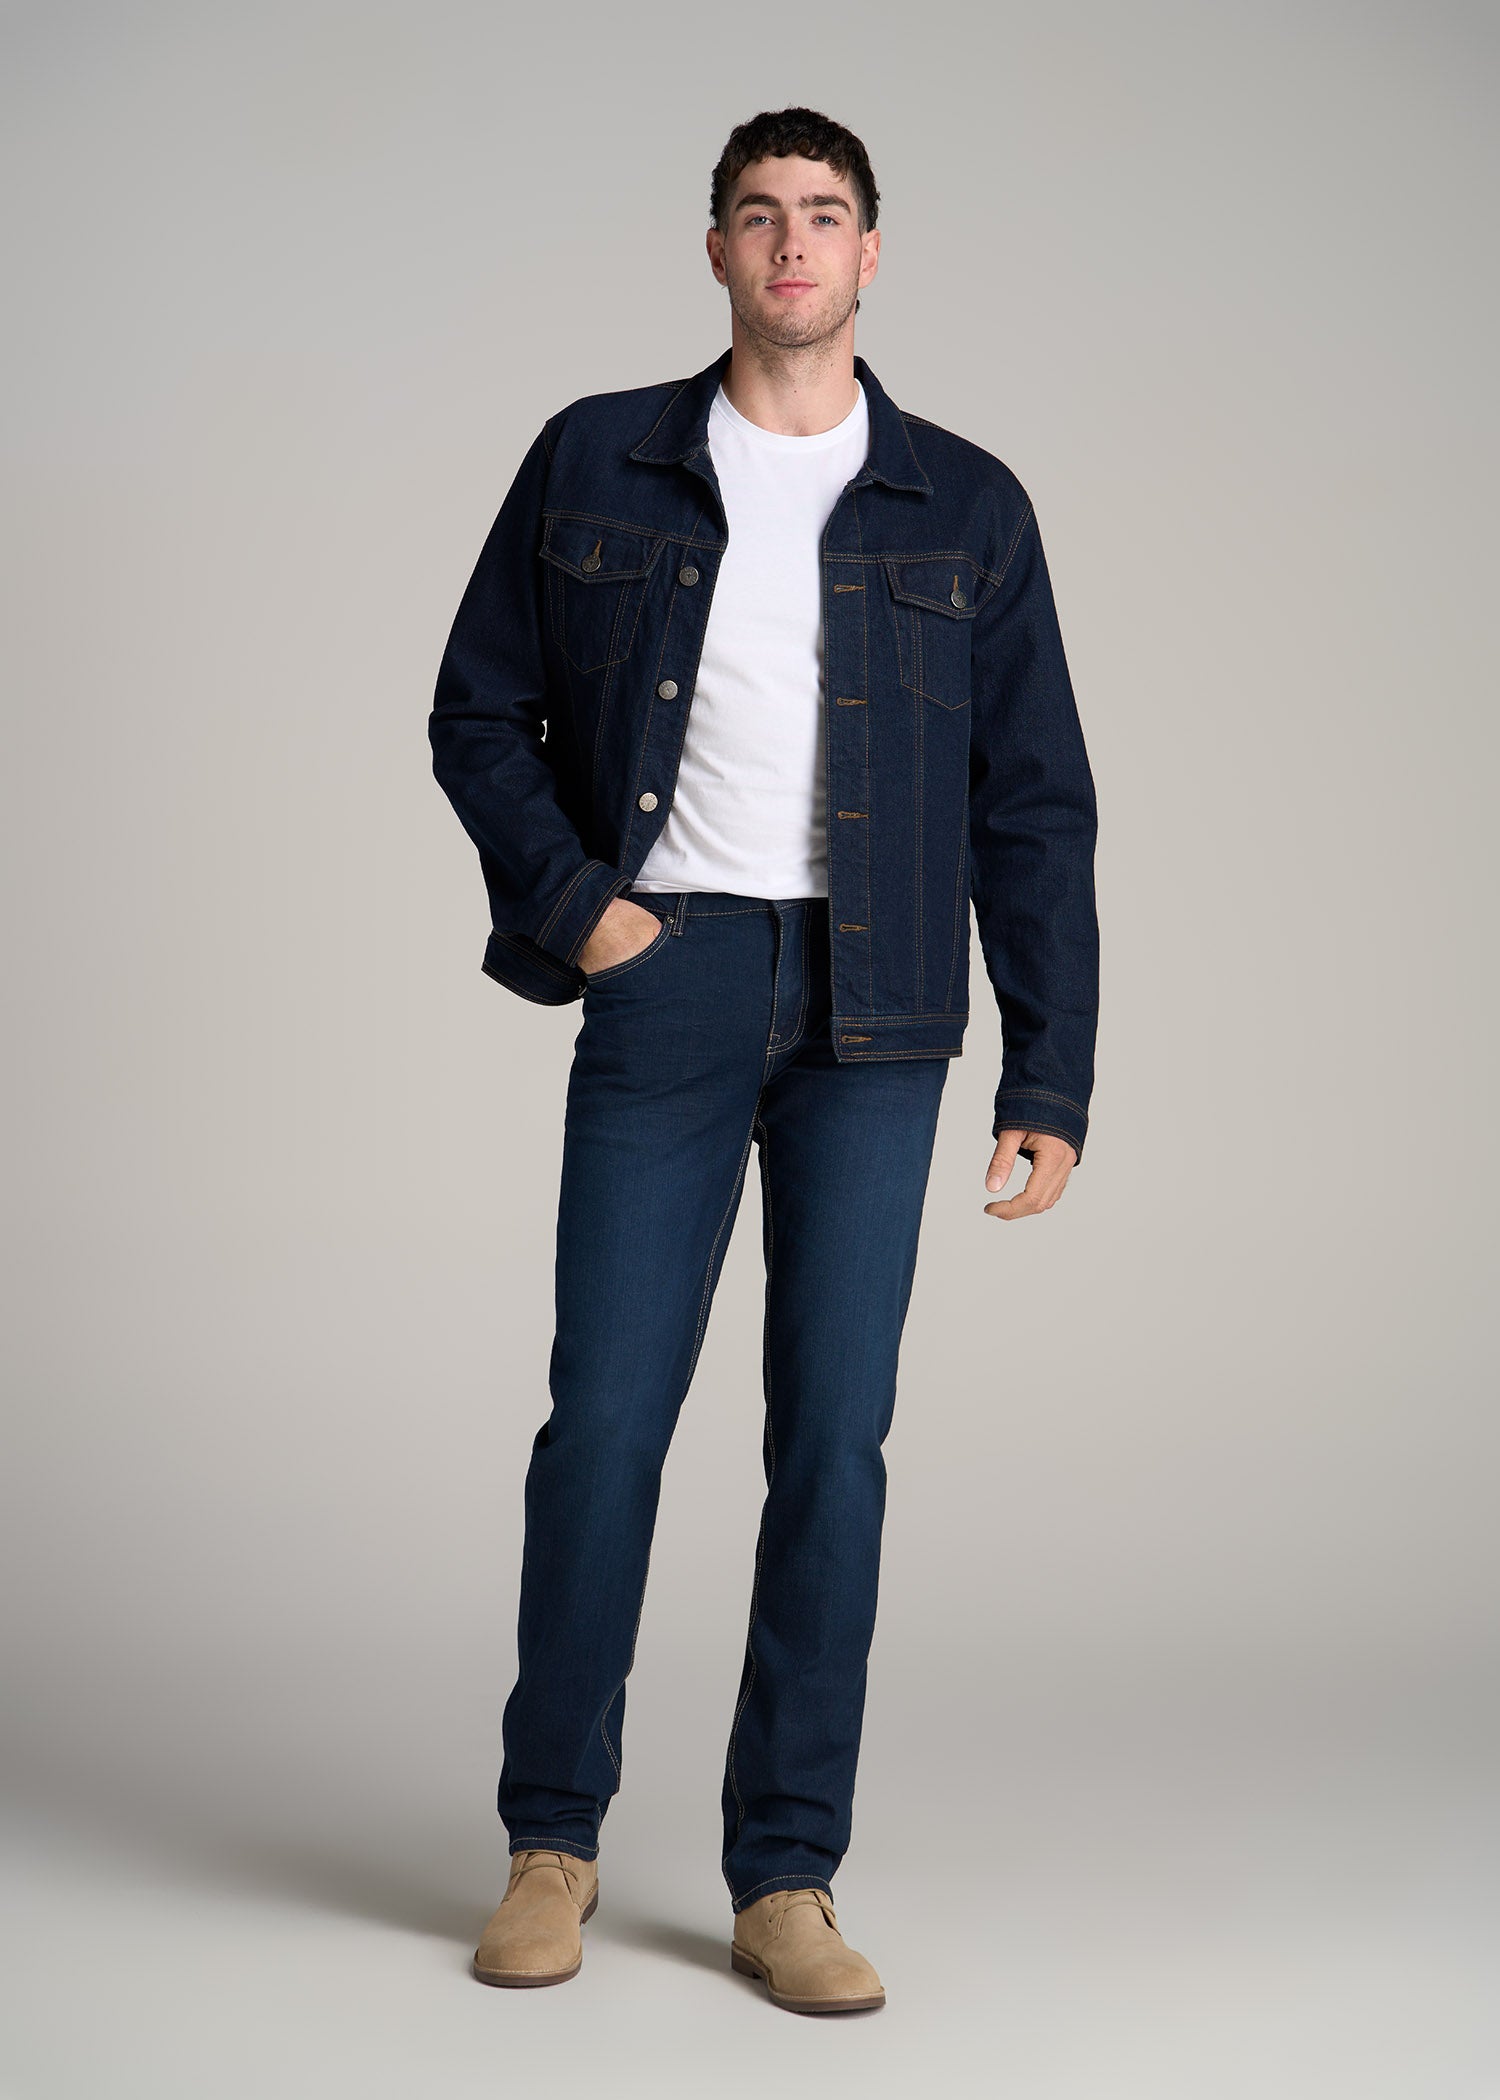 Jeans For Tall Men | Blue Steel Jeans | American Tall